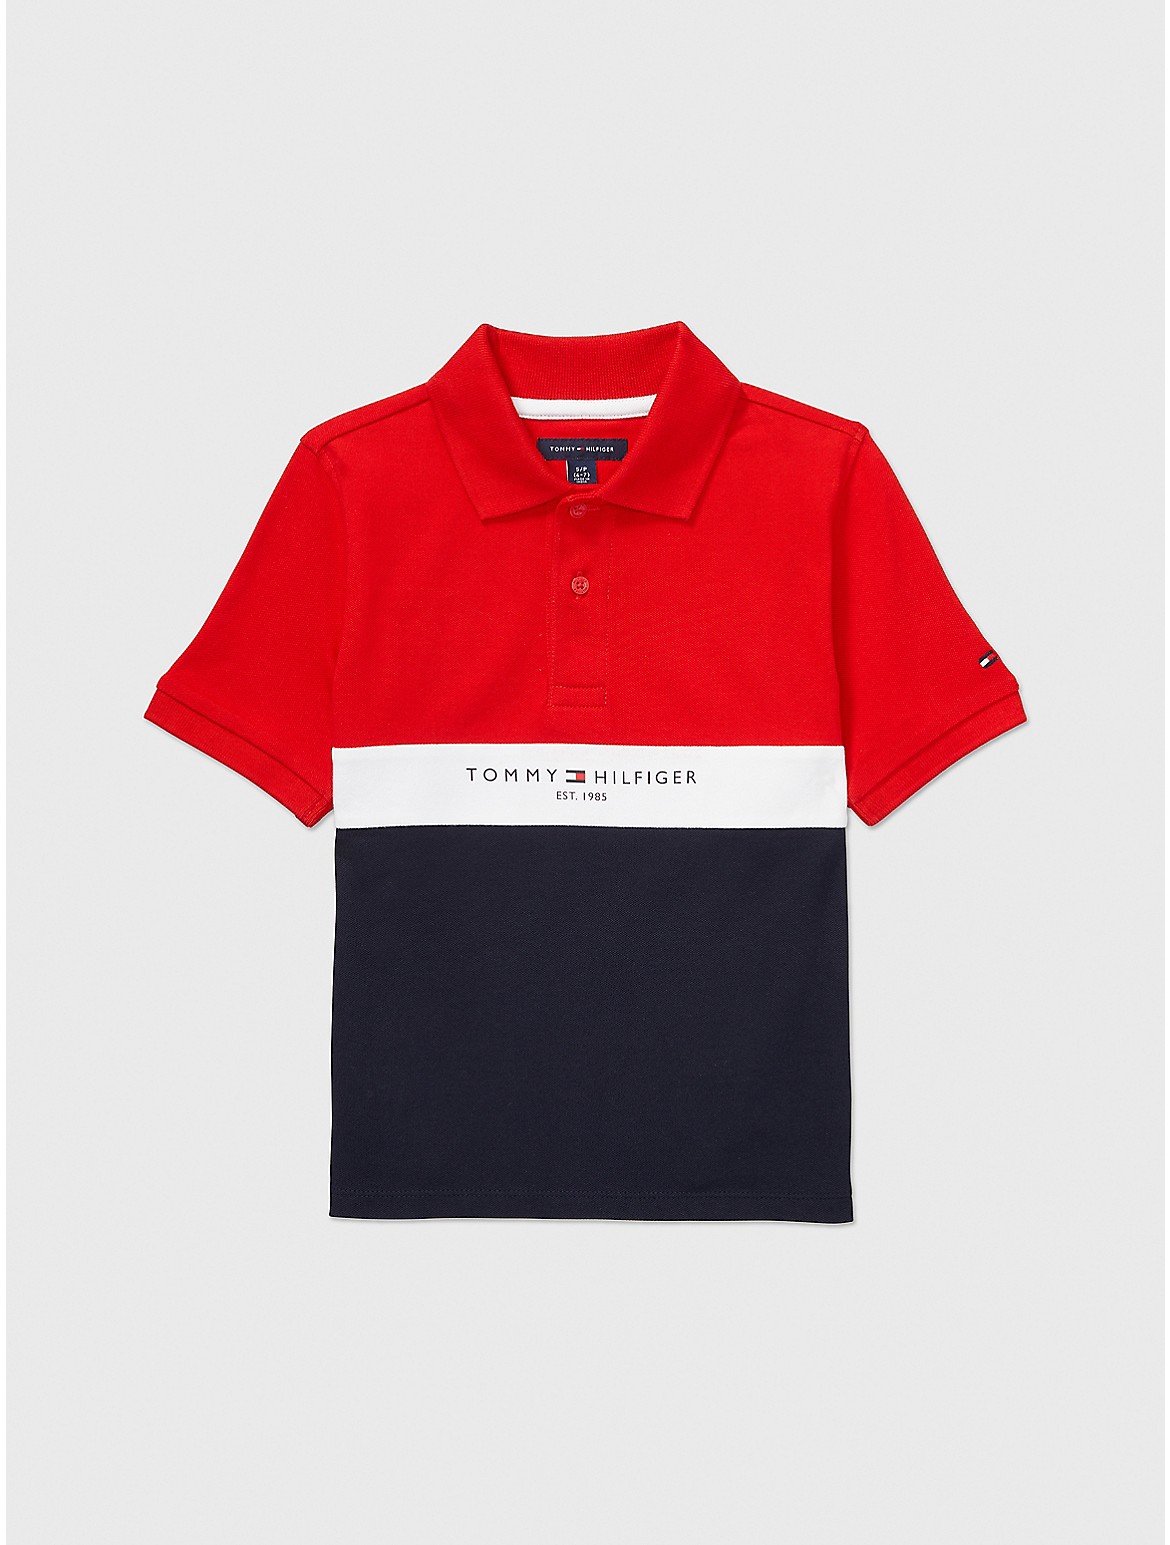 Tommy Hilfiger Boys' Seated Fit Flag Block Polo - Red - XS